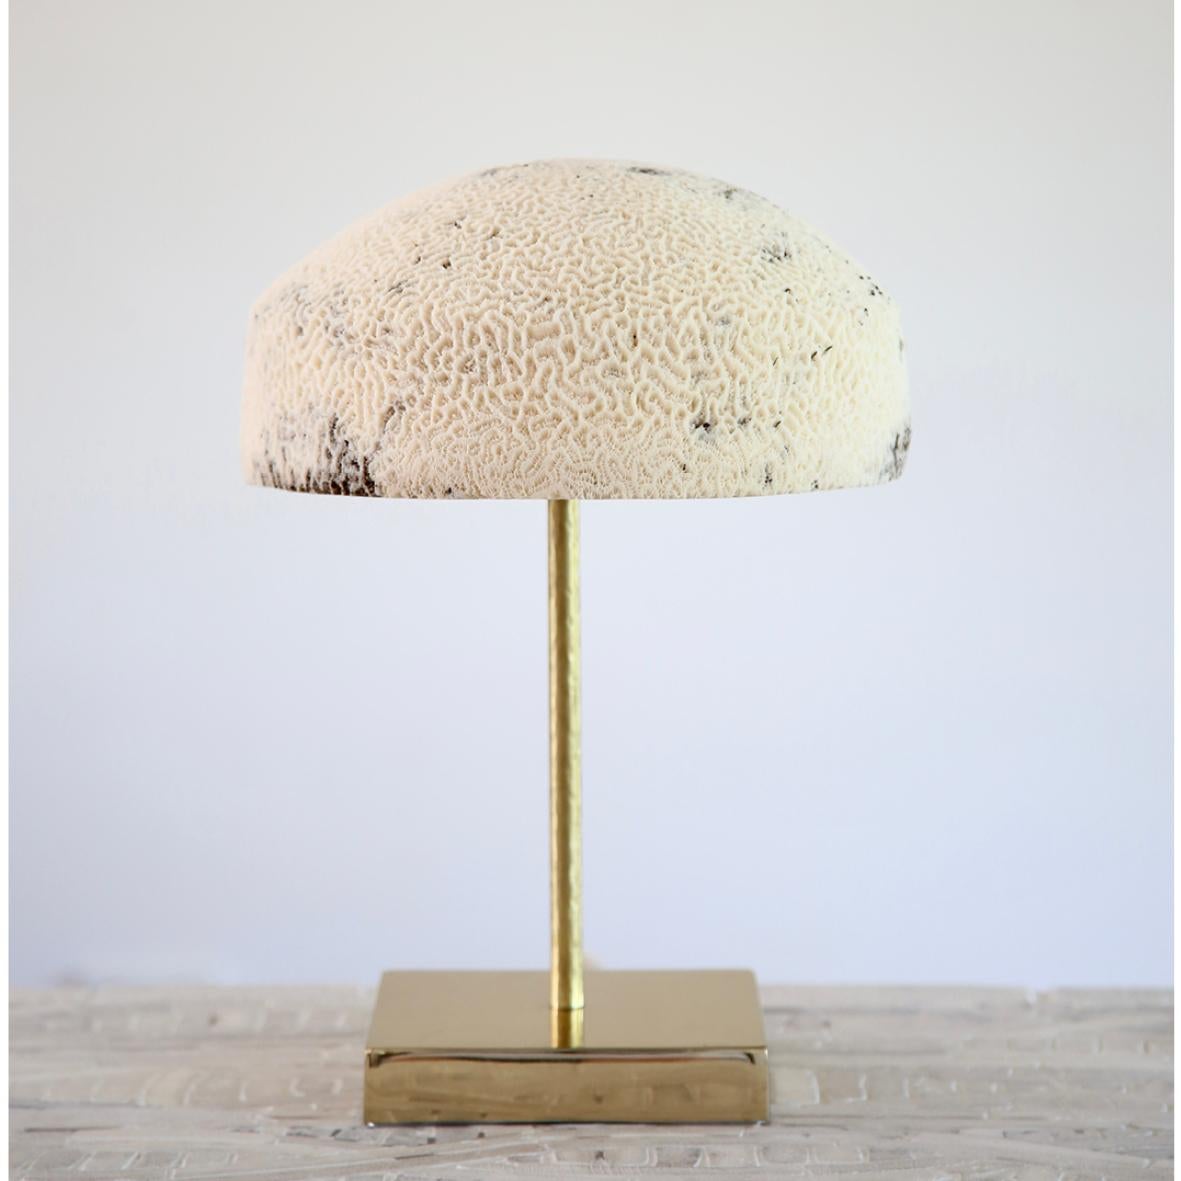 Solomon Islands Fossil Coral Lamp - Dome - Hand-Crafted Ethical Chic Relic For Sale